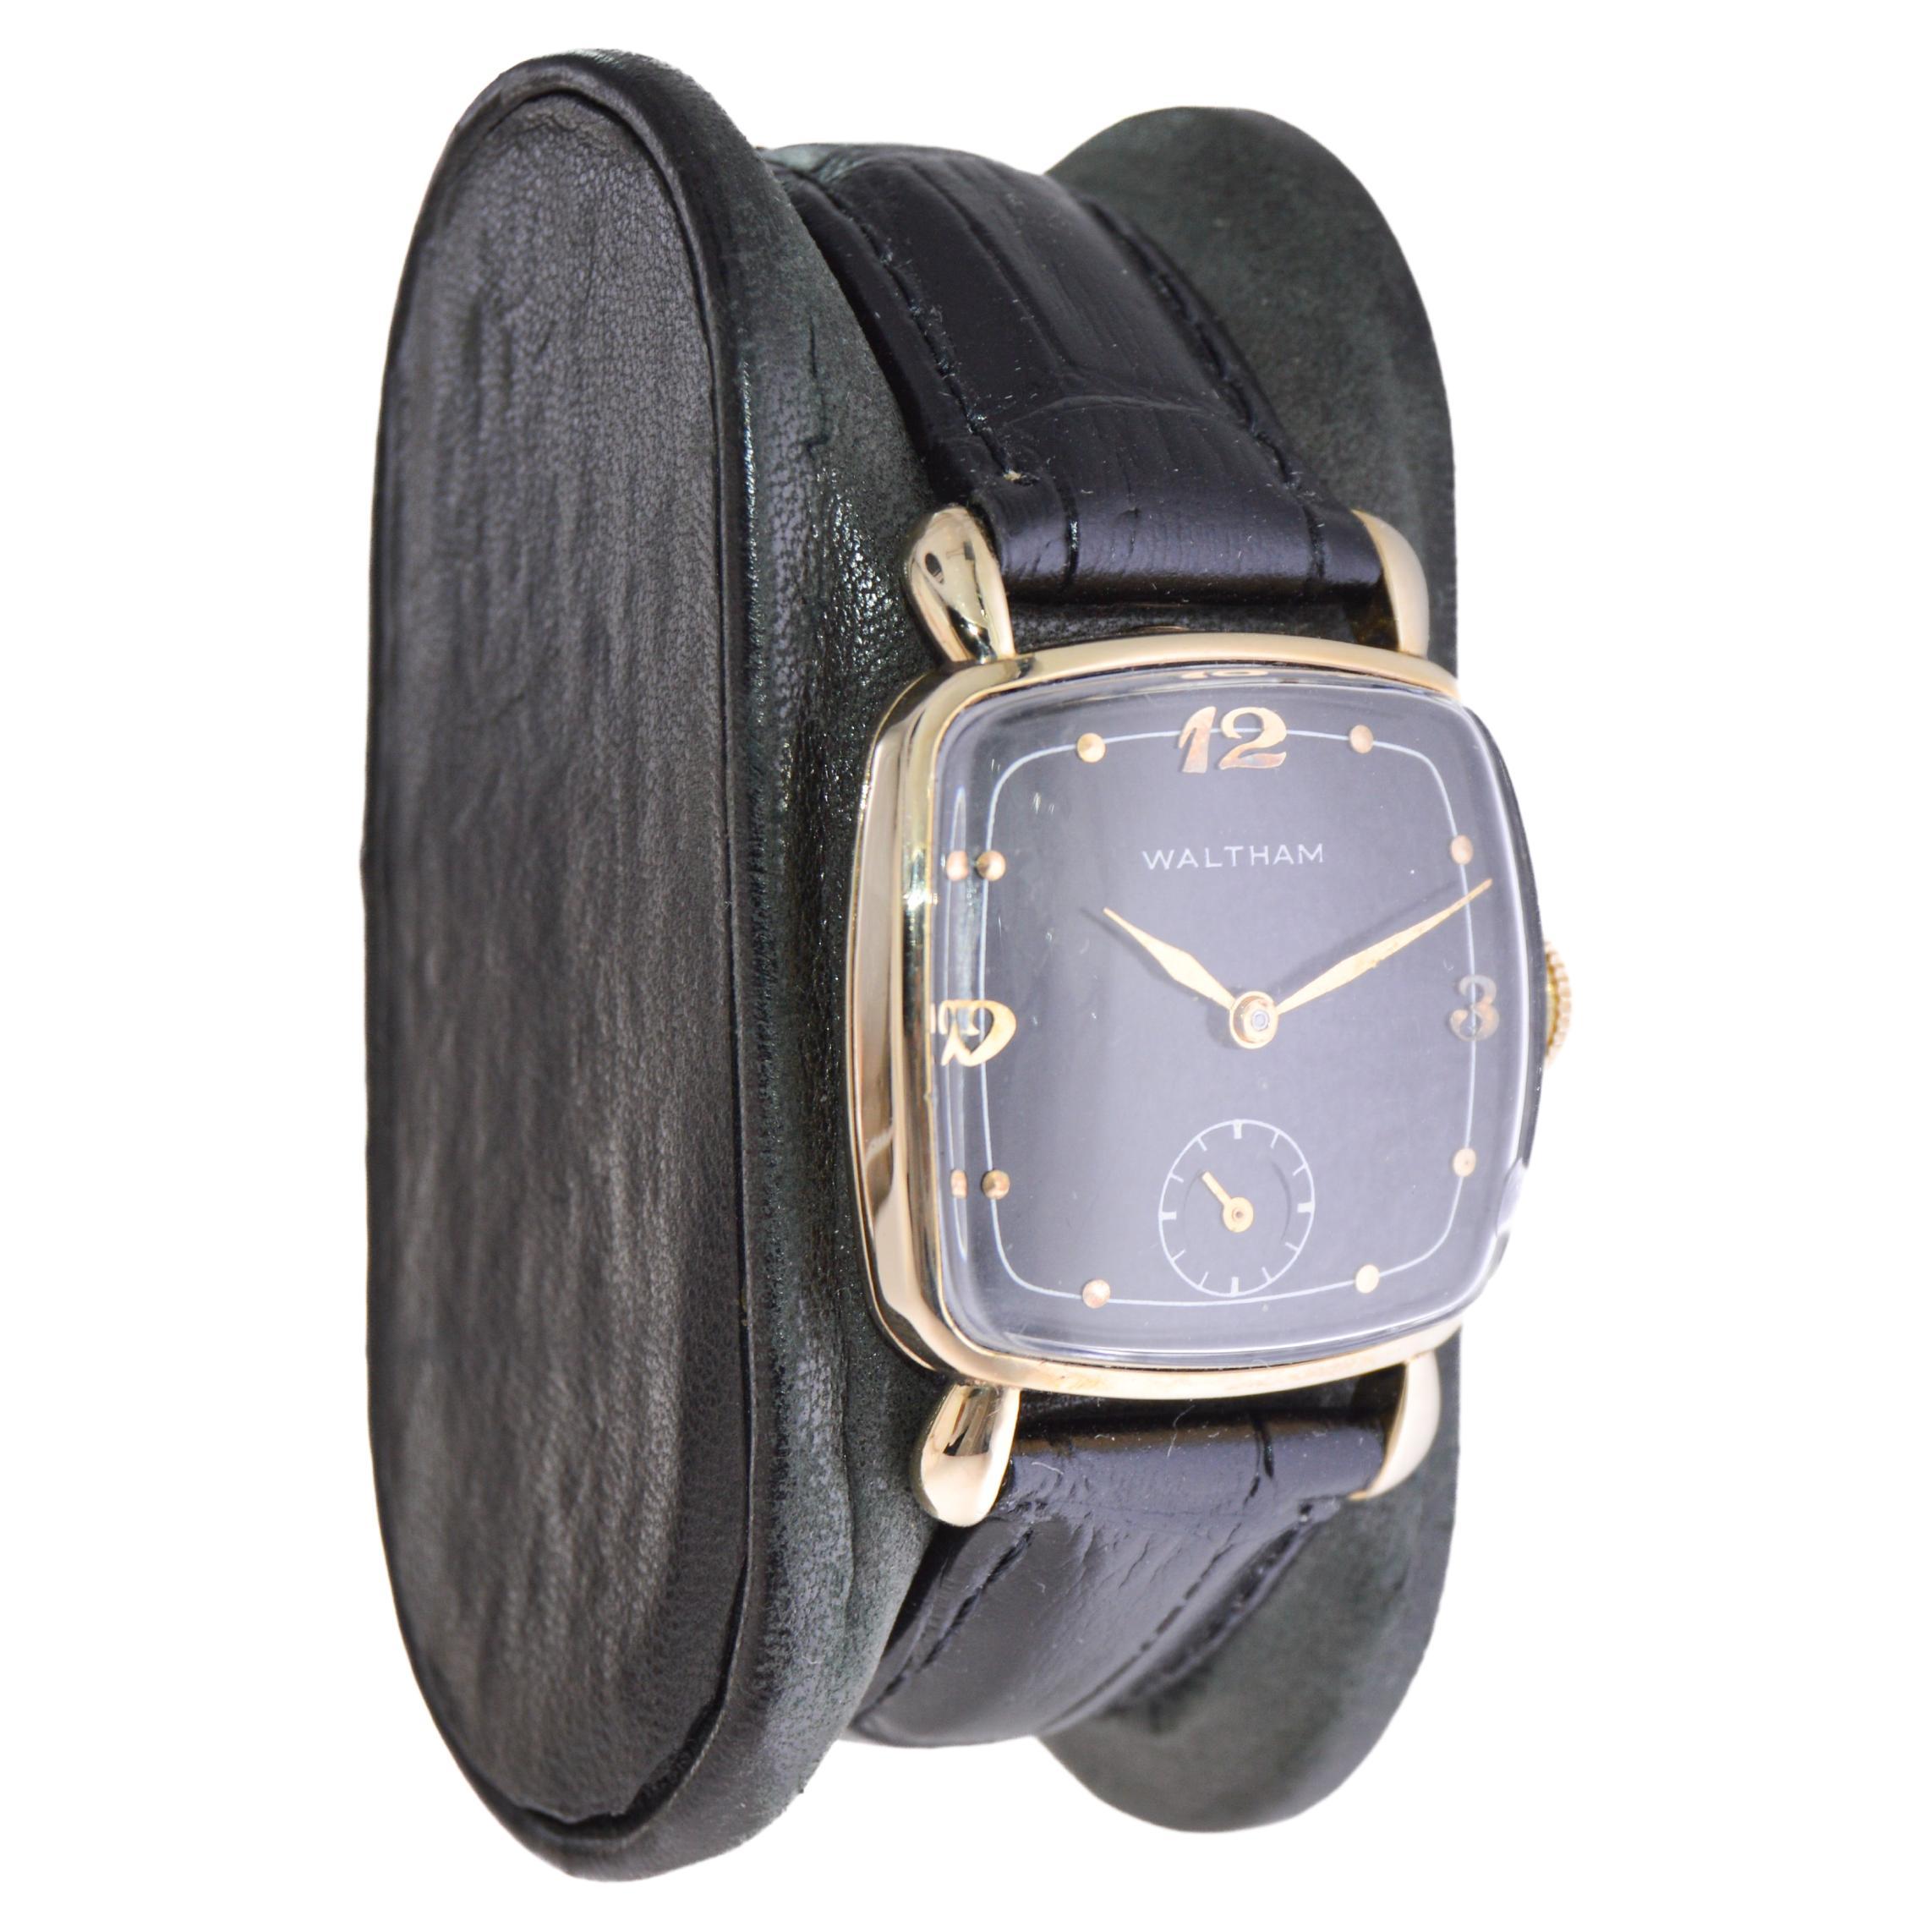 FACTORY / HOUSE: Waltham Watch Company
STYLE / REFERENCE: Cushion Shape / Art Deco 
METAL / MATERIAL: 14Kt. Solid Gold 
CIRCA / YEAR: 1940's
DIMENSIONS / SIZE: Length 37mm X Width 28mm
MOVEMENT / CALIBER: Manual Winding / 21 Jewels / Caliber 6/0 -